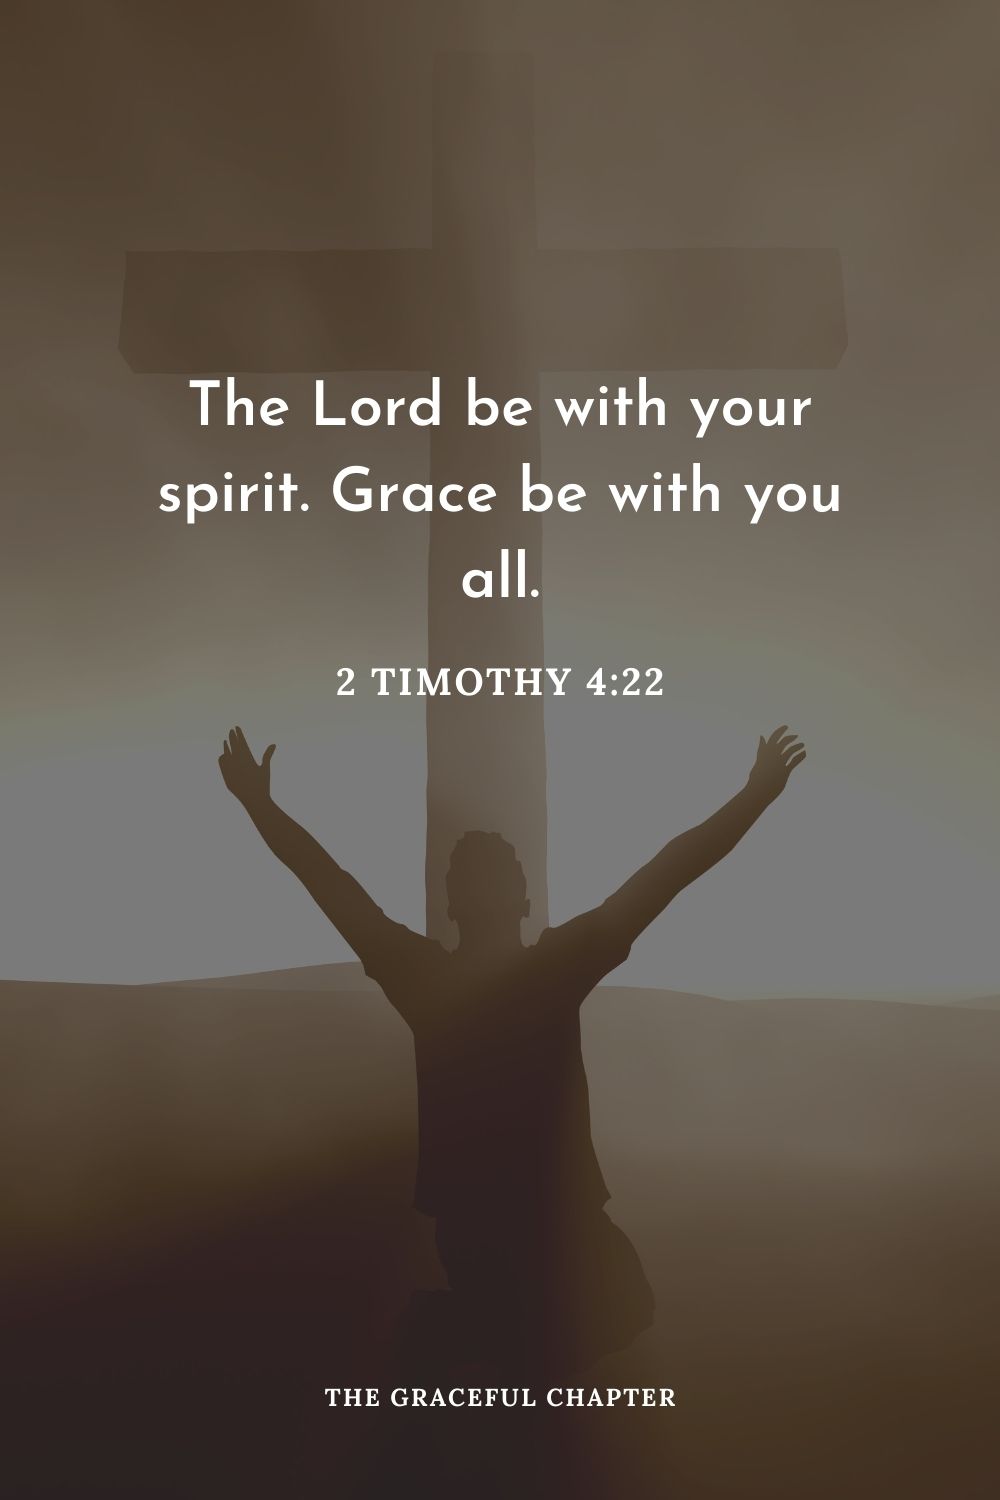 The Lord be with your spirit. Grace be with you all.